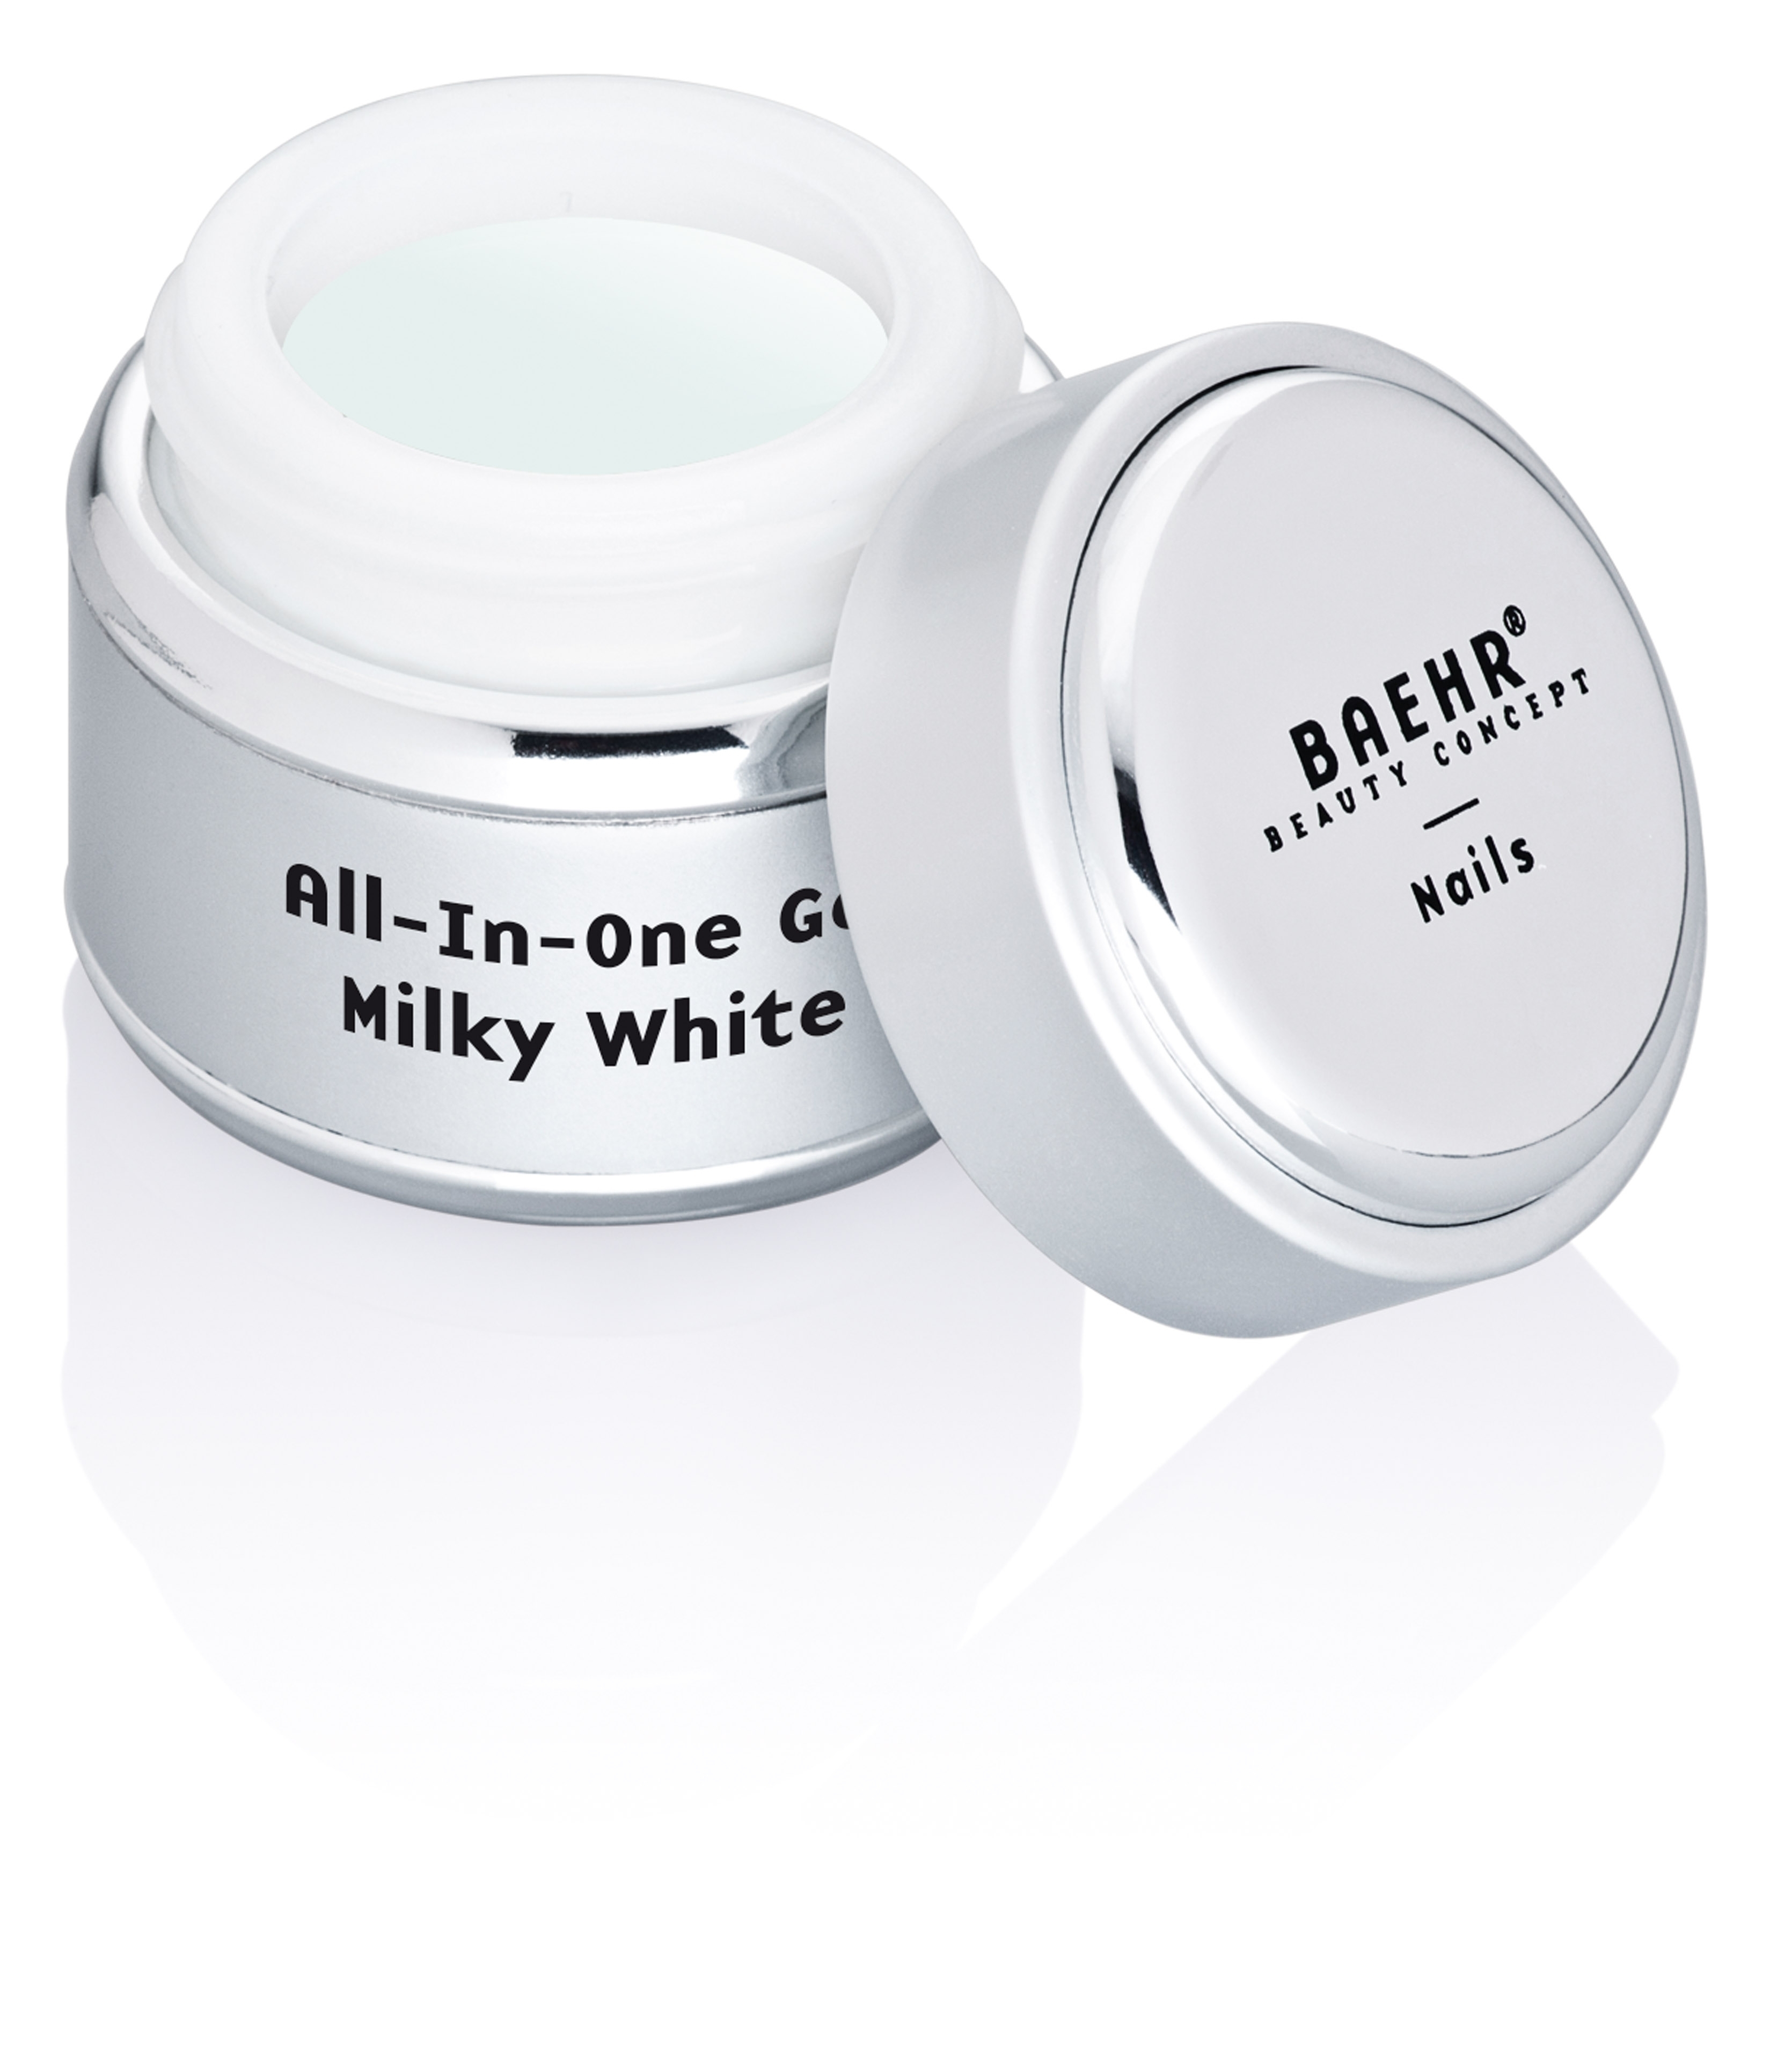 BAEHR BEAUTY CONCEPT - NAILS All-In-One Gel milky white, UV & LED 5 ml